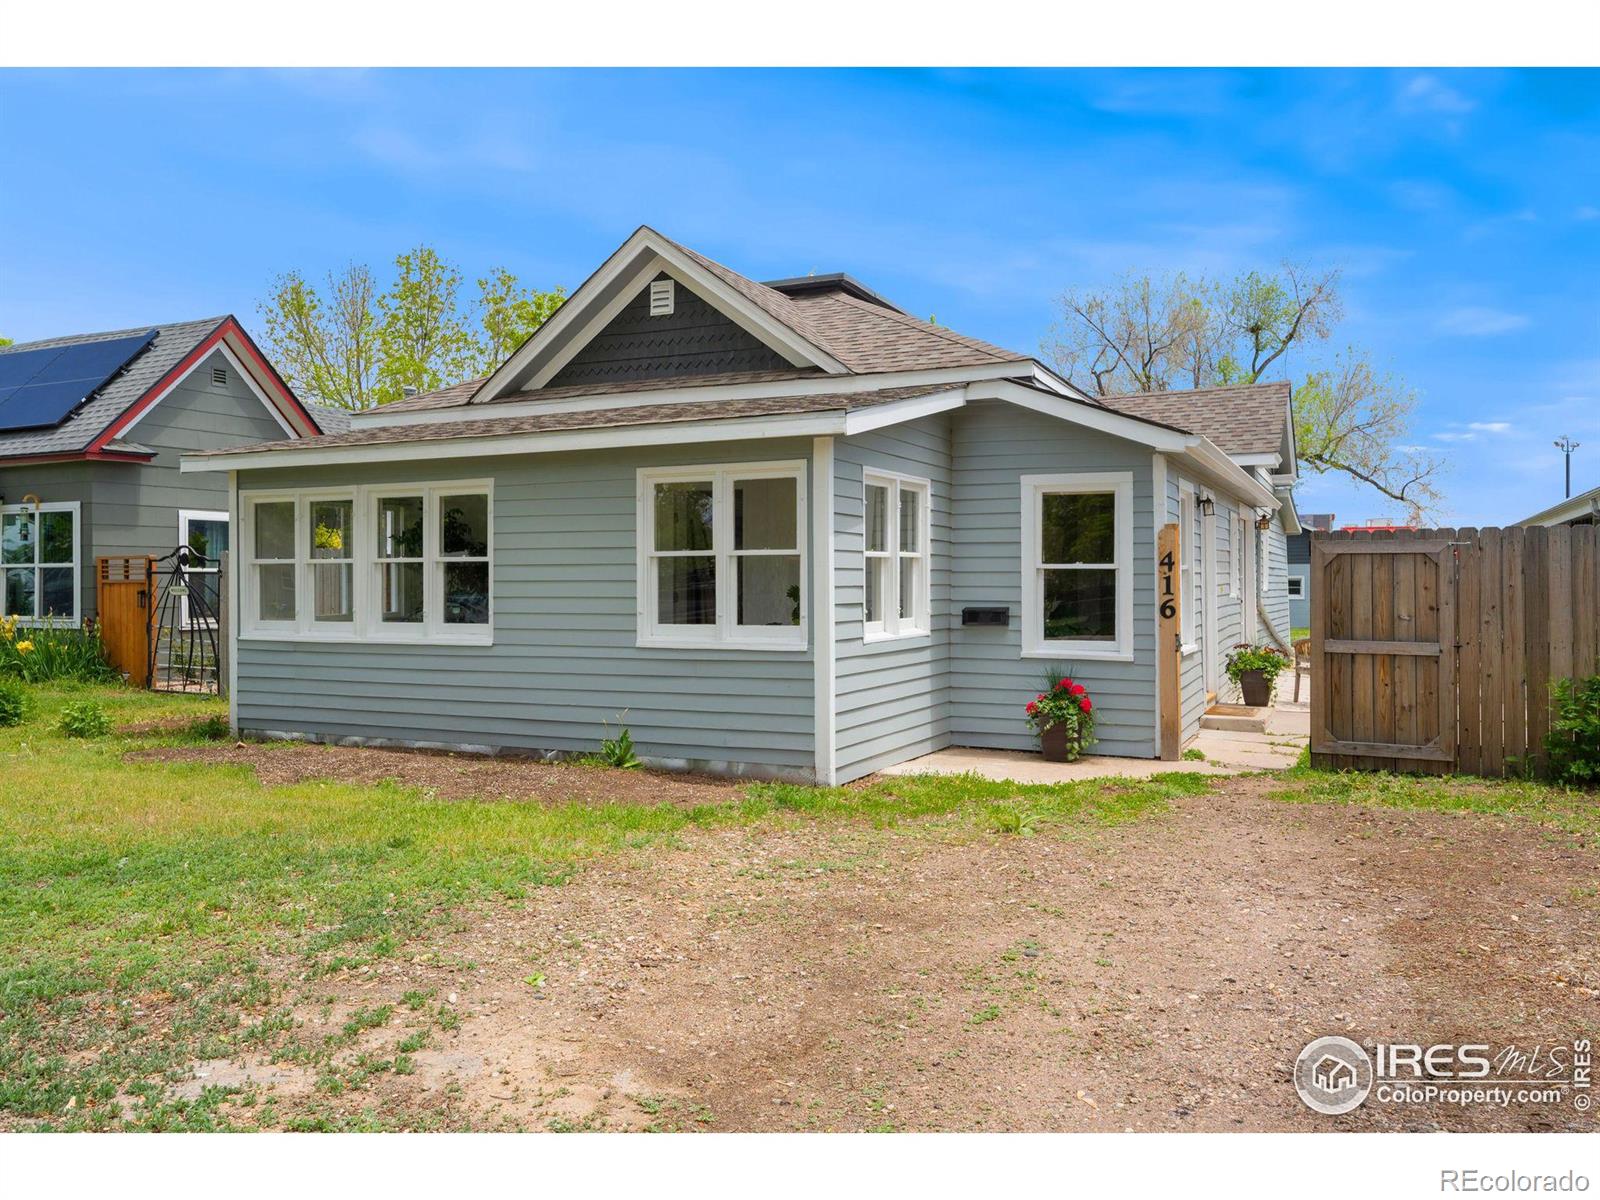 416  Stover Street, fort collins MLS: 4567891010680 Beds: 3 Baths: 1 Price: $525,000